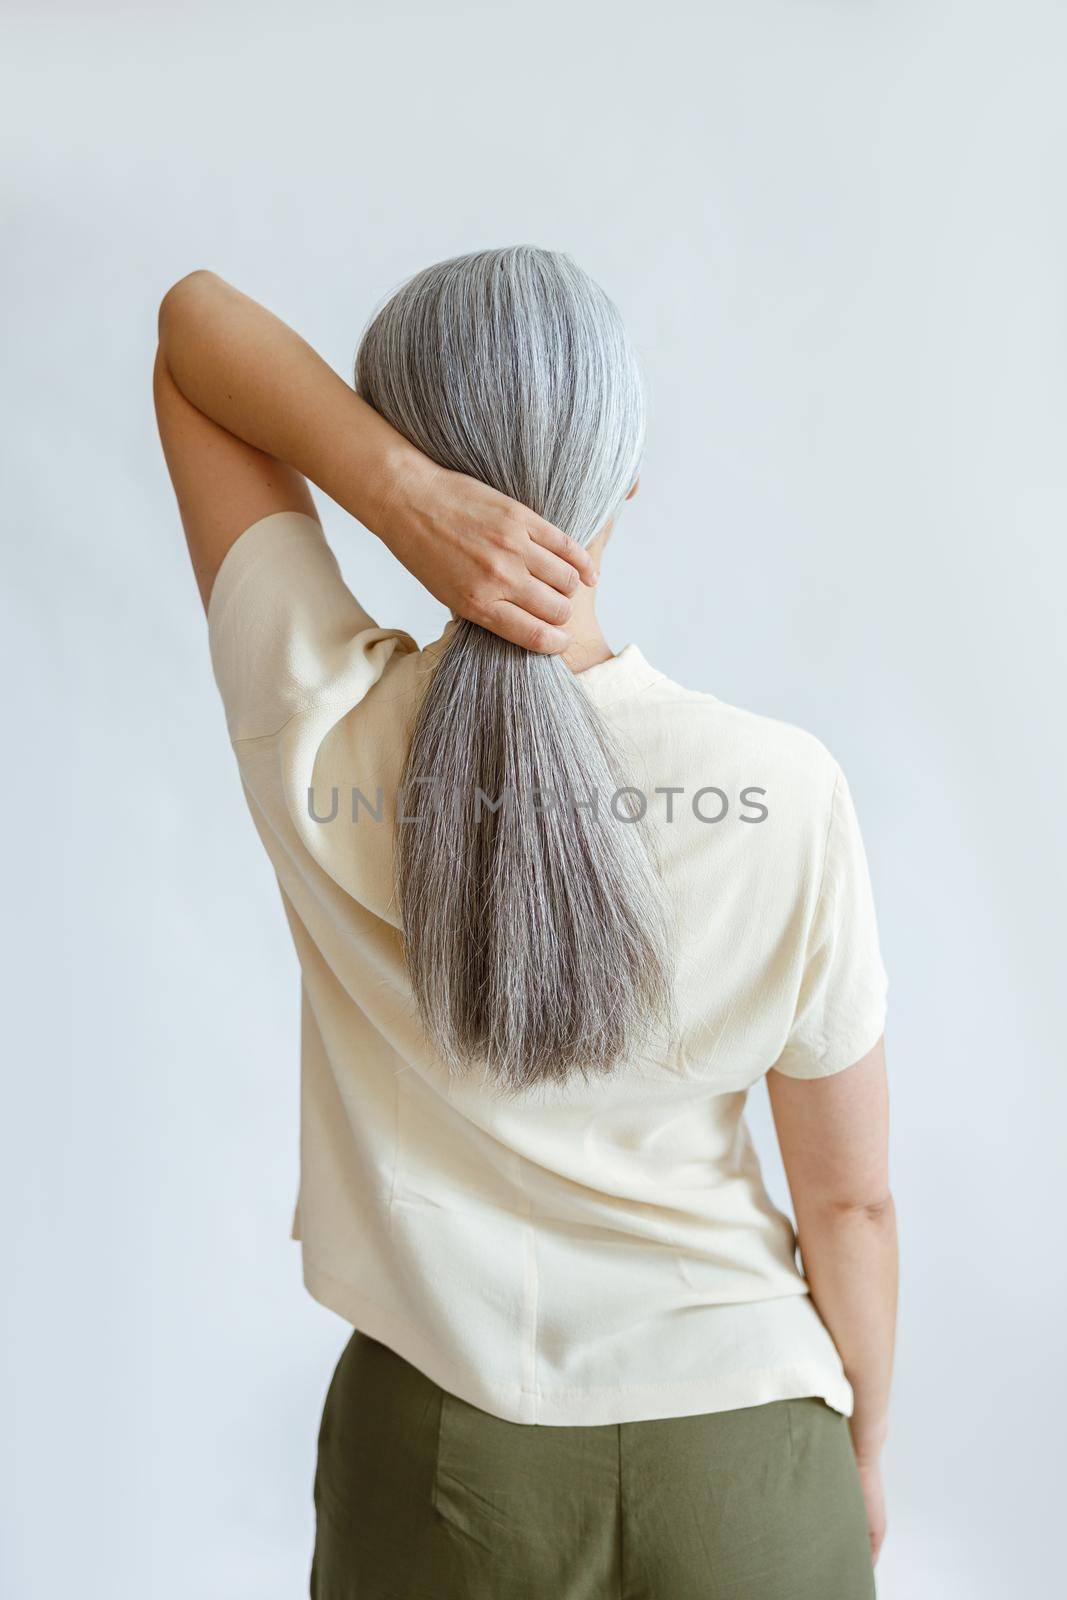 Elegant woman in yellow shirt makes polytail of long silver hair standing on light grey background in studio backside view. Mature beauty lifestyle